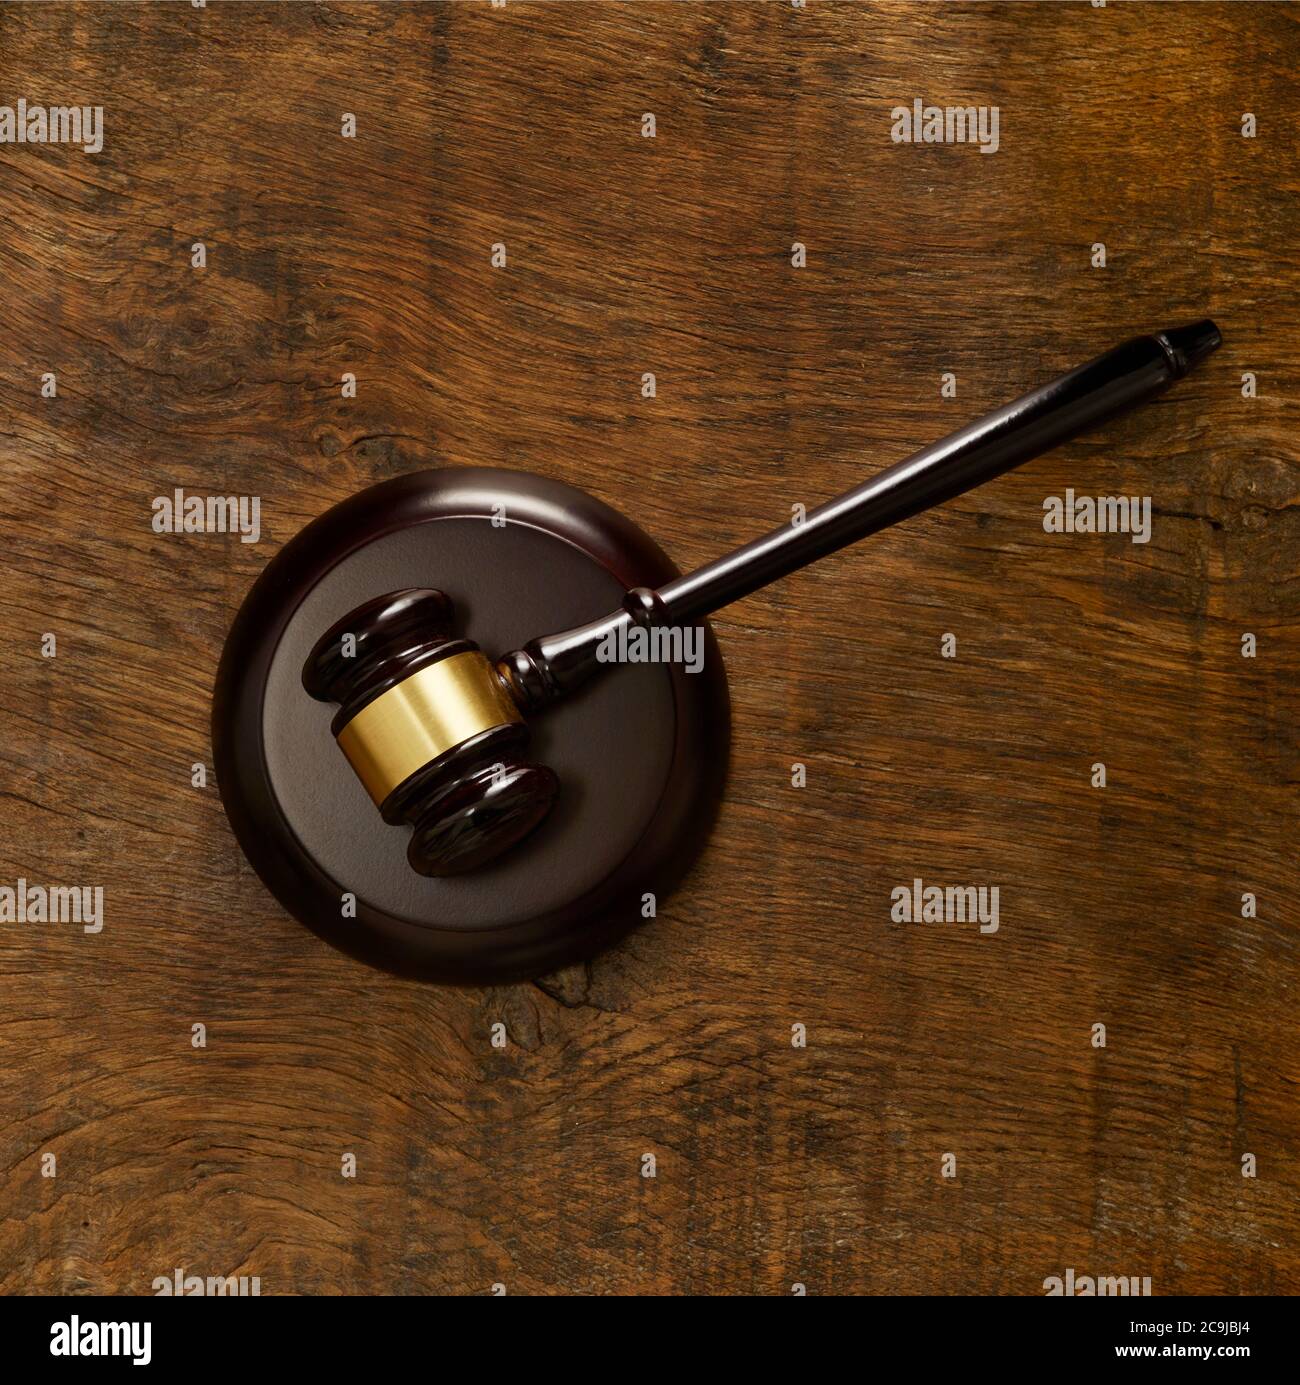 Lawers gavel against wooden background. Stock Photo